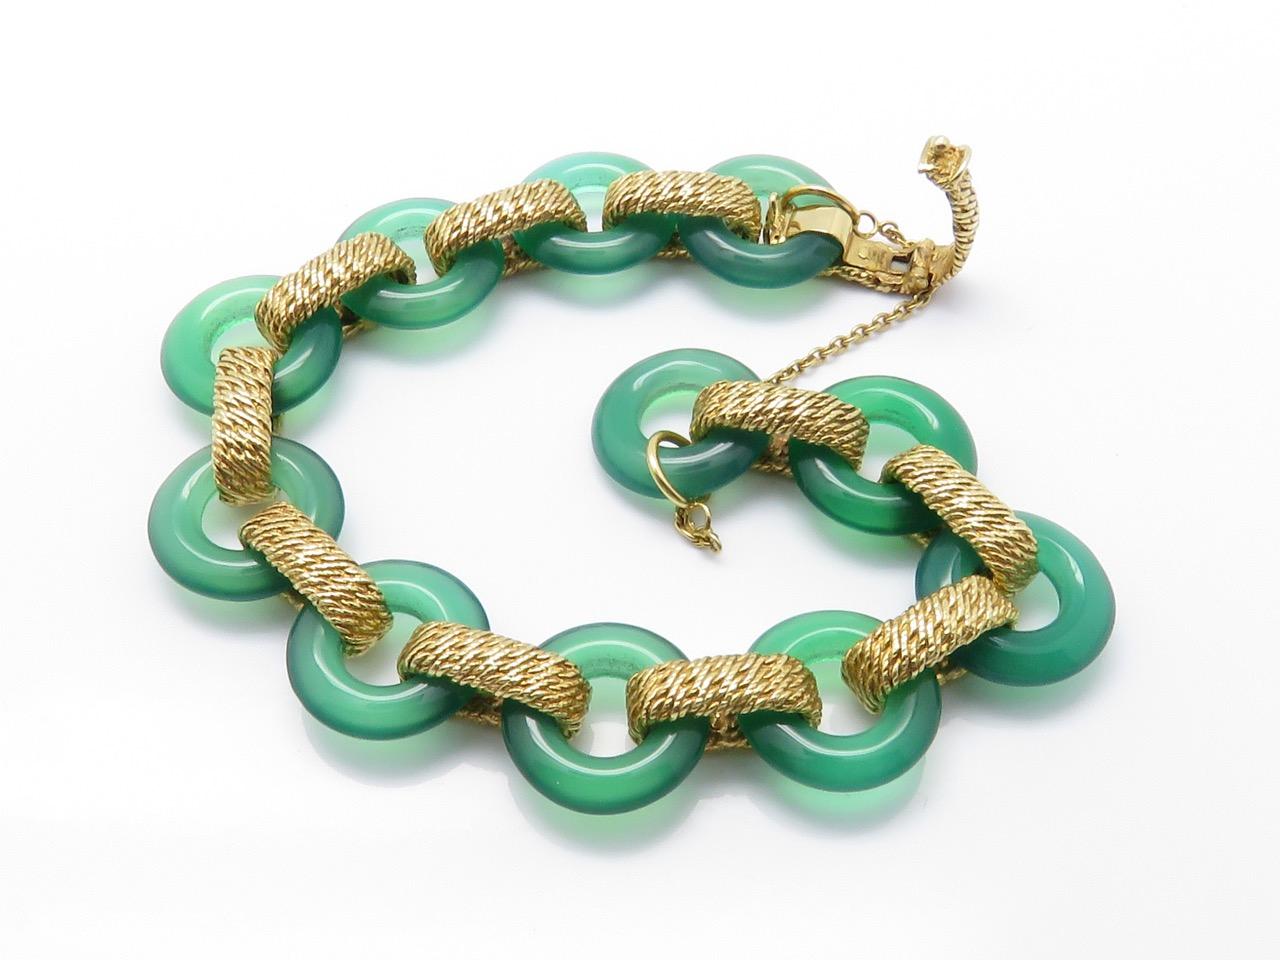 This  Green Agate 18k Yellow Gold Bracelet.
Signed V C A and numbered and stamped with French hallmarks.
Circa 1970
Measurements:
Length: 7.09 In ( 18 cm )       Width: 0.59 In ( 1.5 cm )
Weight: 45 Grams